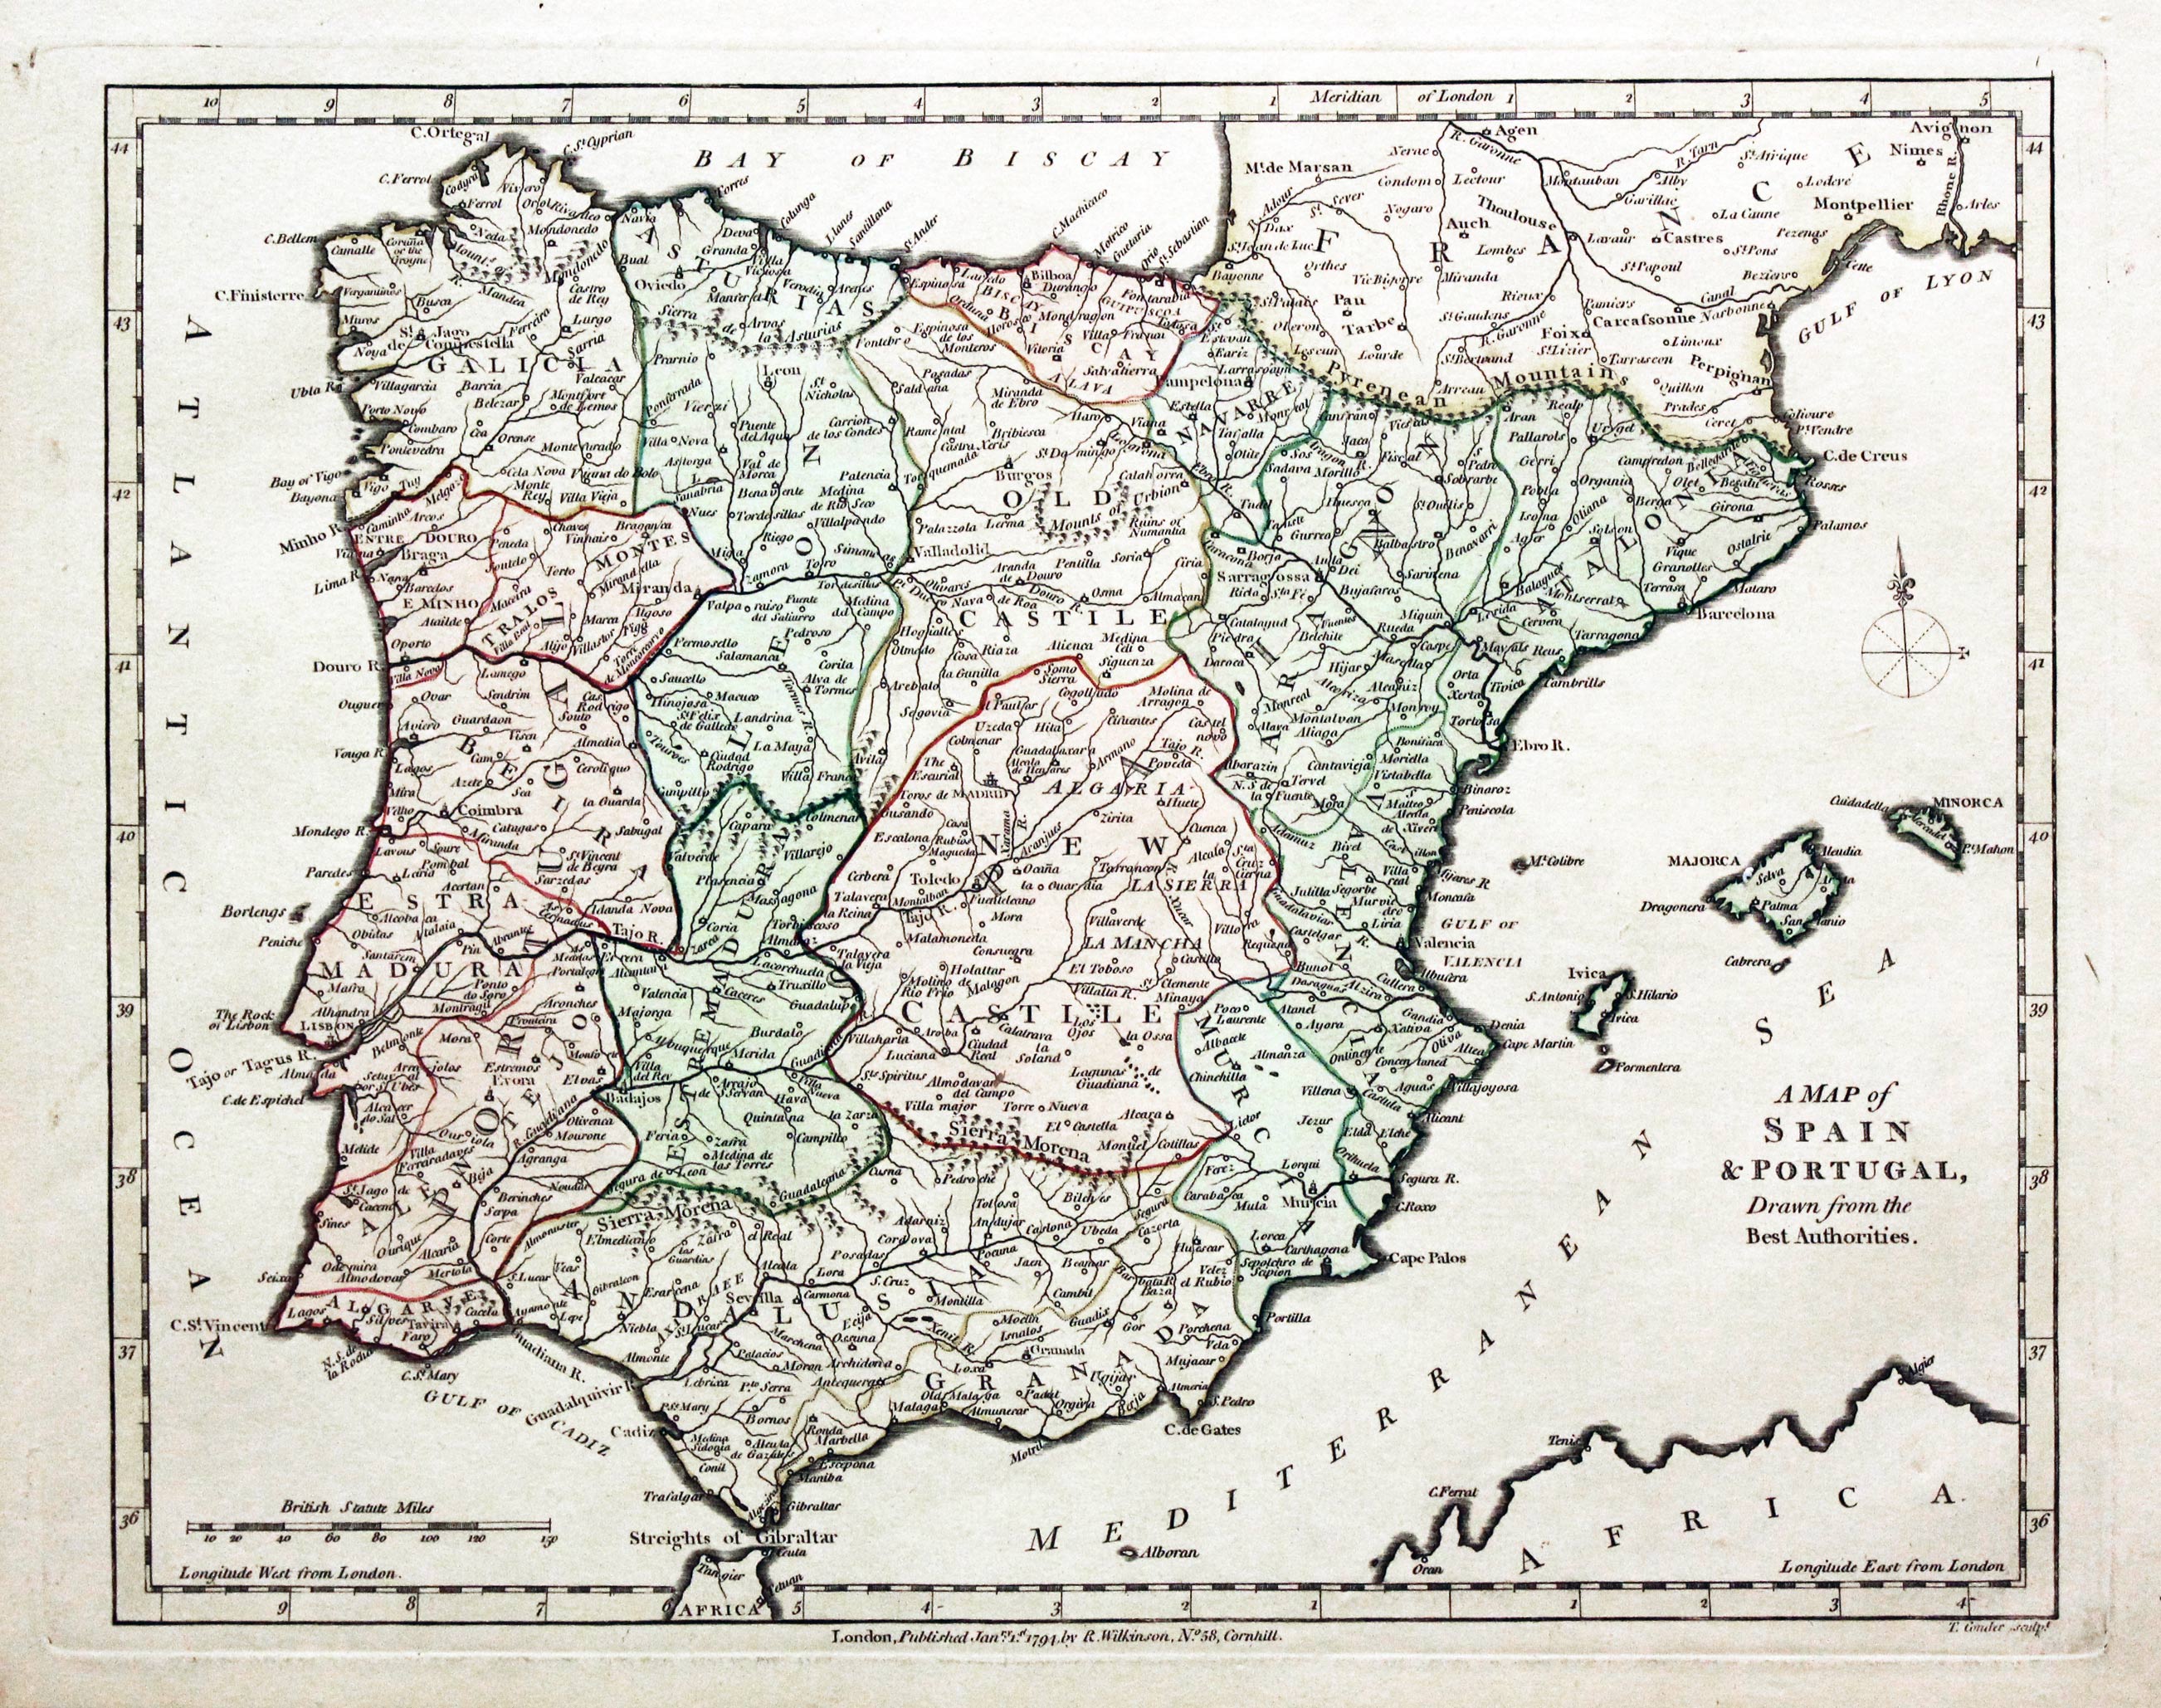 A MAP OF SPAIN & PORTUGAL DRAWN FROM THE BEST AUTHORITIES